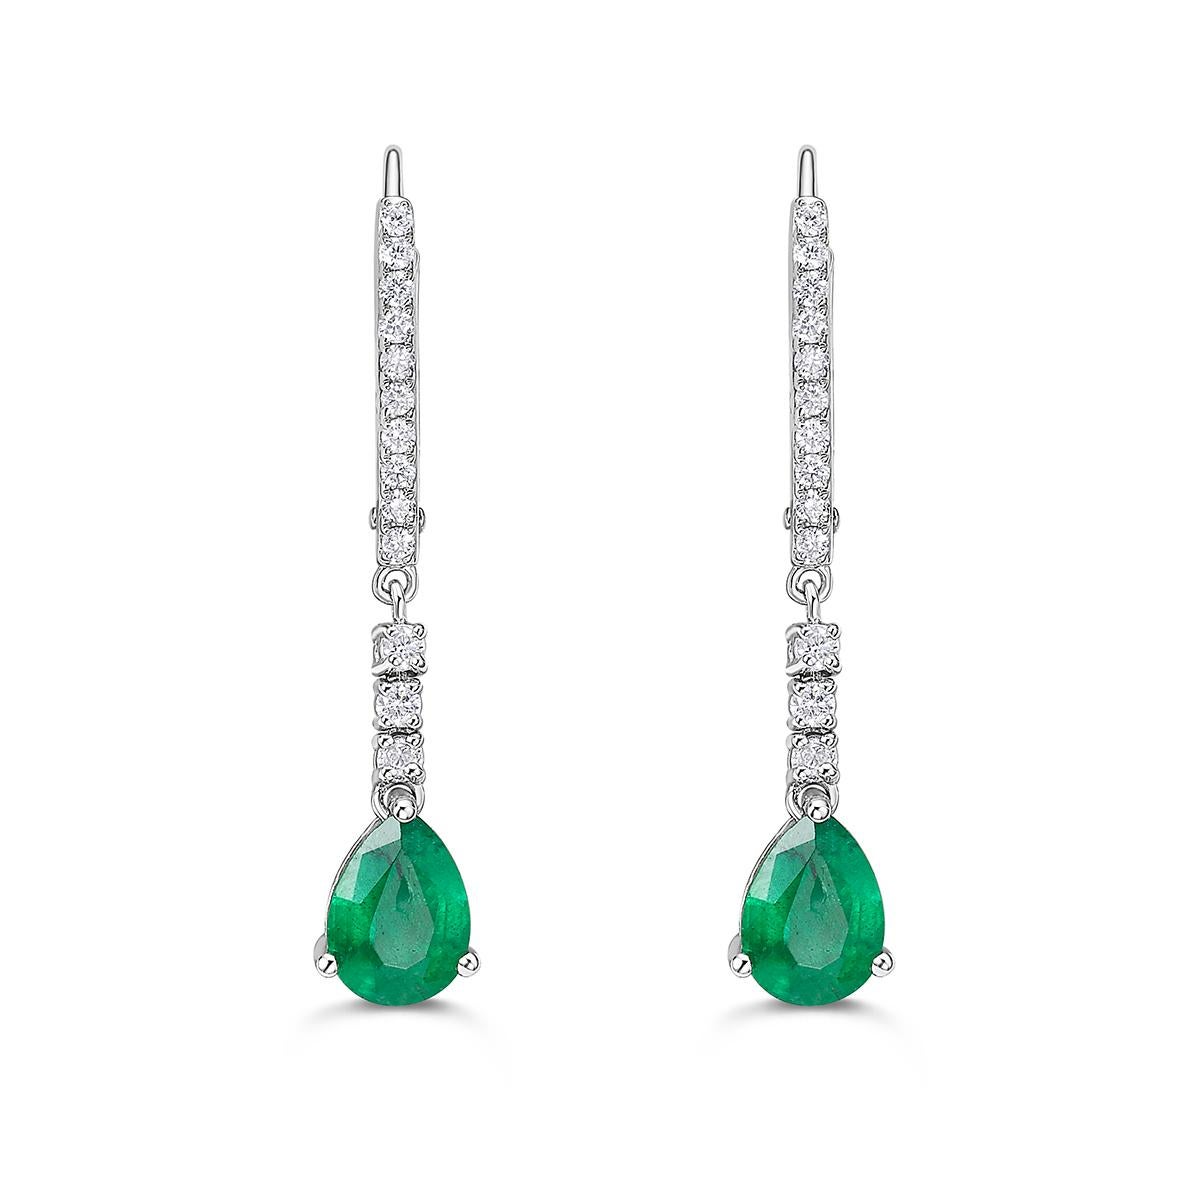 Add a pop of color to your everyday wardrobe with this emerald and diamond earrings featuring a beautiful emerald pear center stone and accent round diamonds. Available in two center stone sizes, 7x5 and 5x3.

14K White Gold Emerald and Diamond